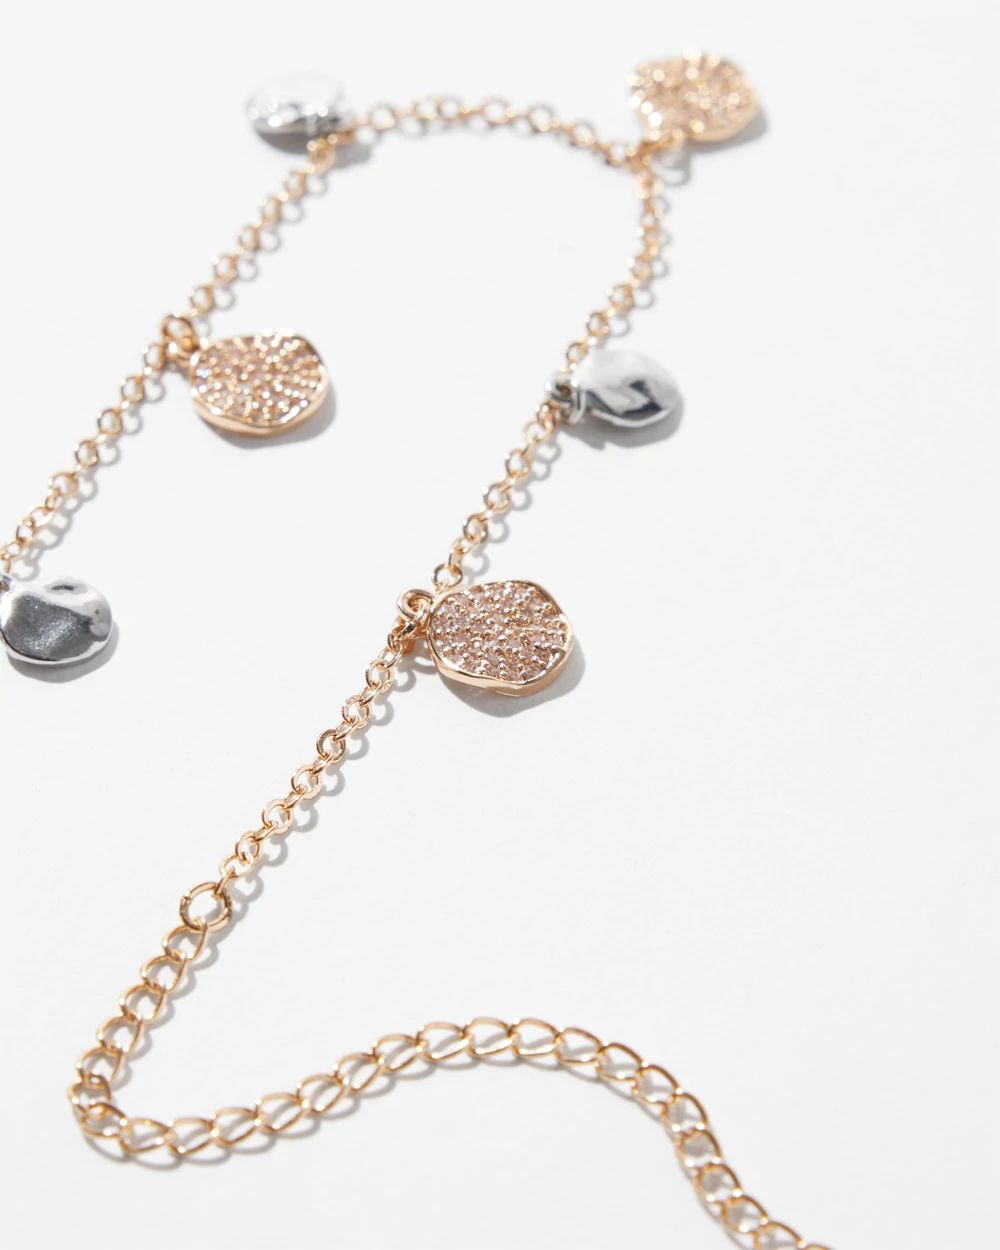 Mixed Metal Pave Disc Short Strand Necklace click to view larger image.